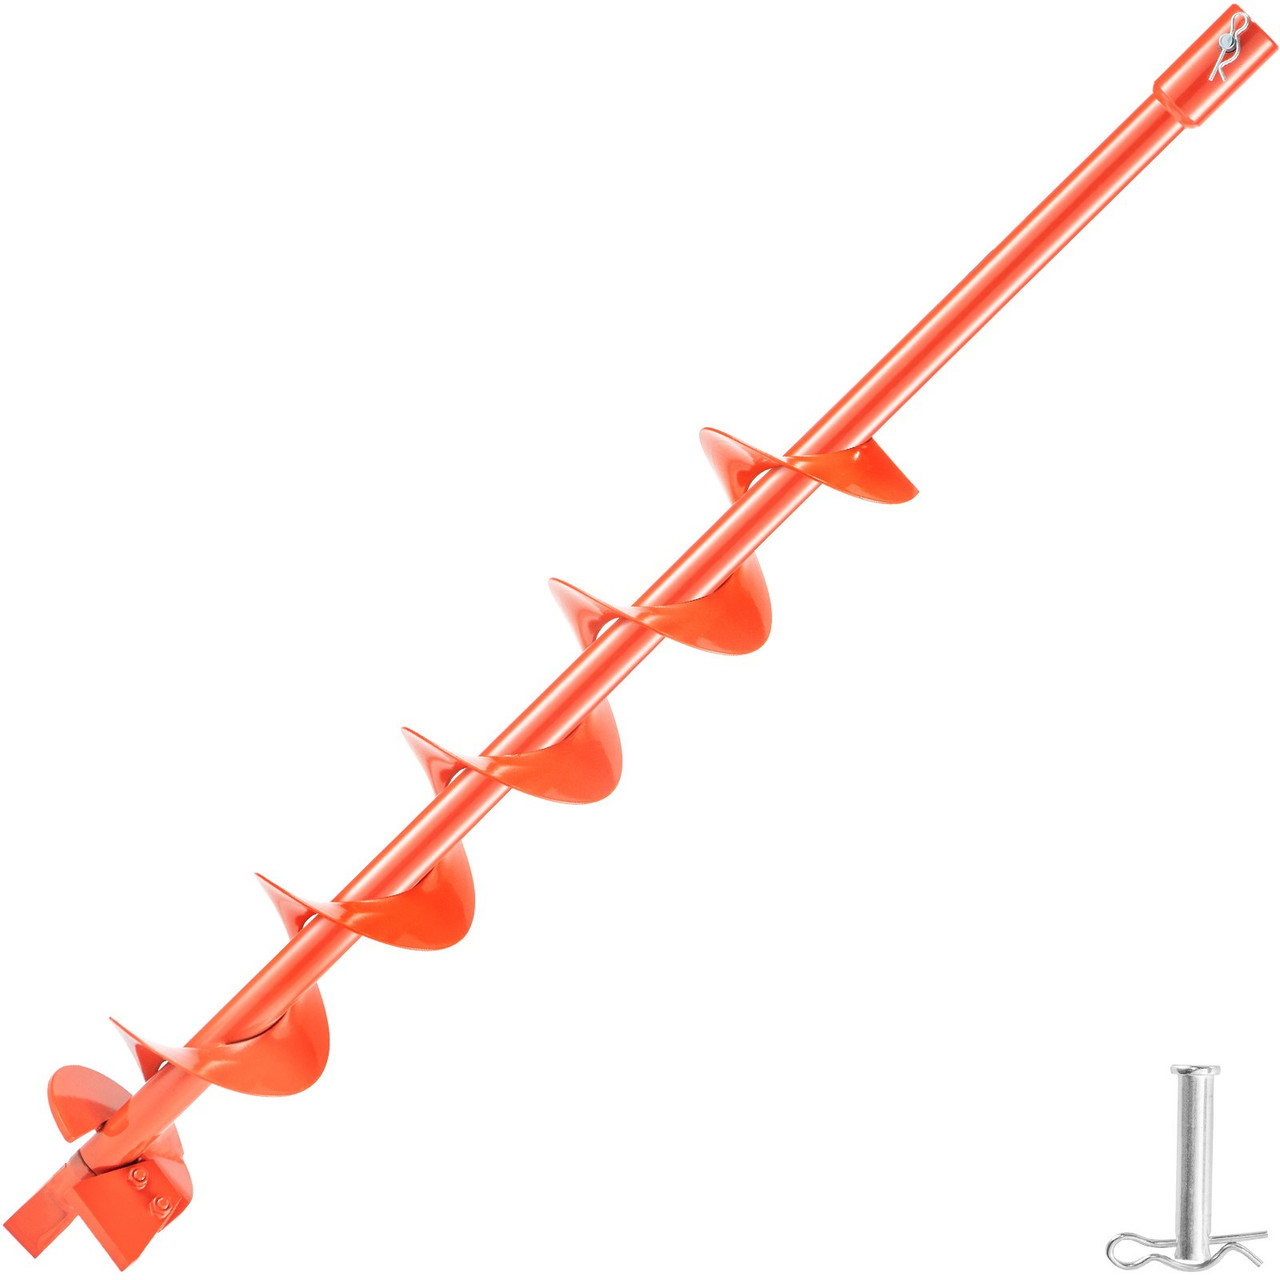 Auger Drill Bit, 4'' (D) x 35'' (L) Garden Auger Drill Bit with Fishtail Point, Drill Auger for 0.79'' Drill, Heavy Duty Garden Auger for Planting Bulbs, Bedding Plants, Digging Hole